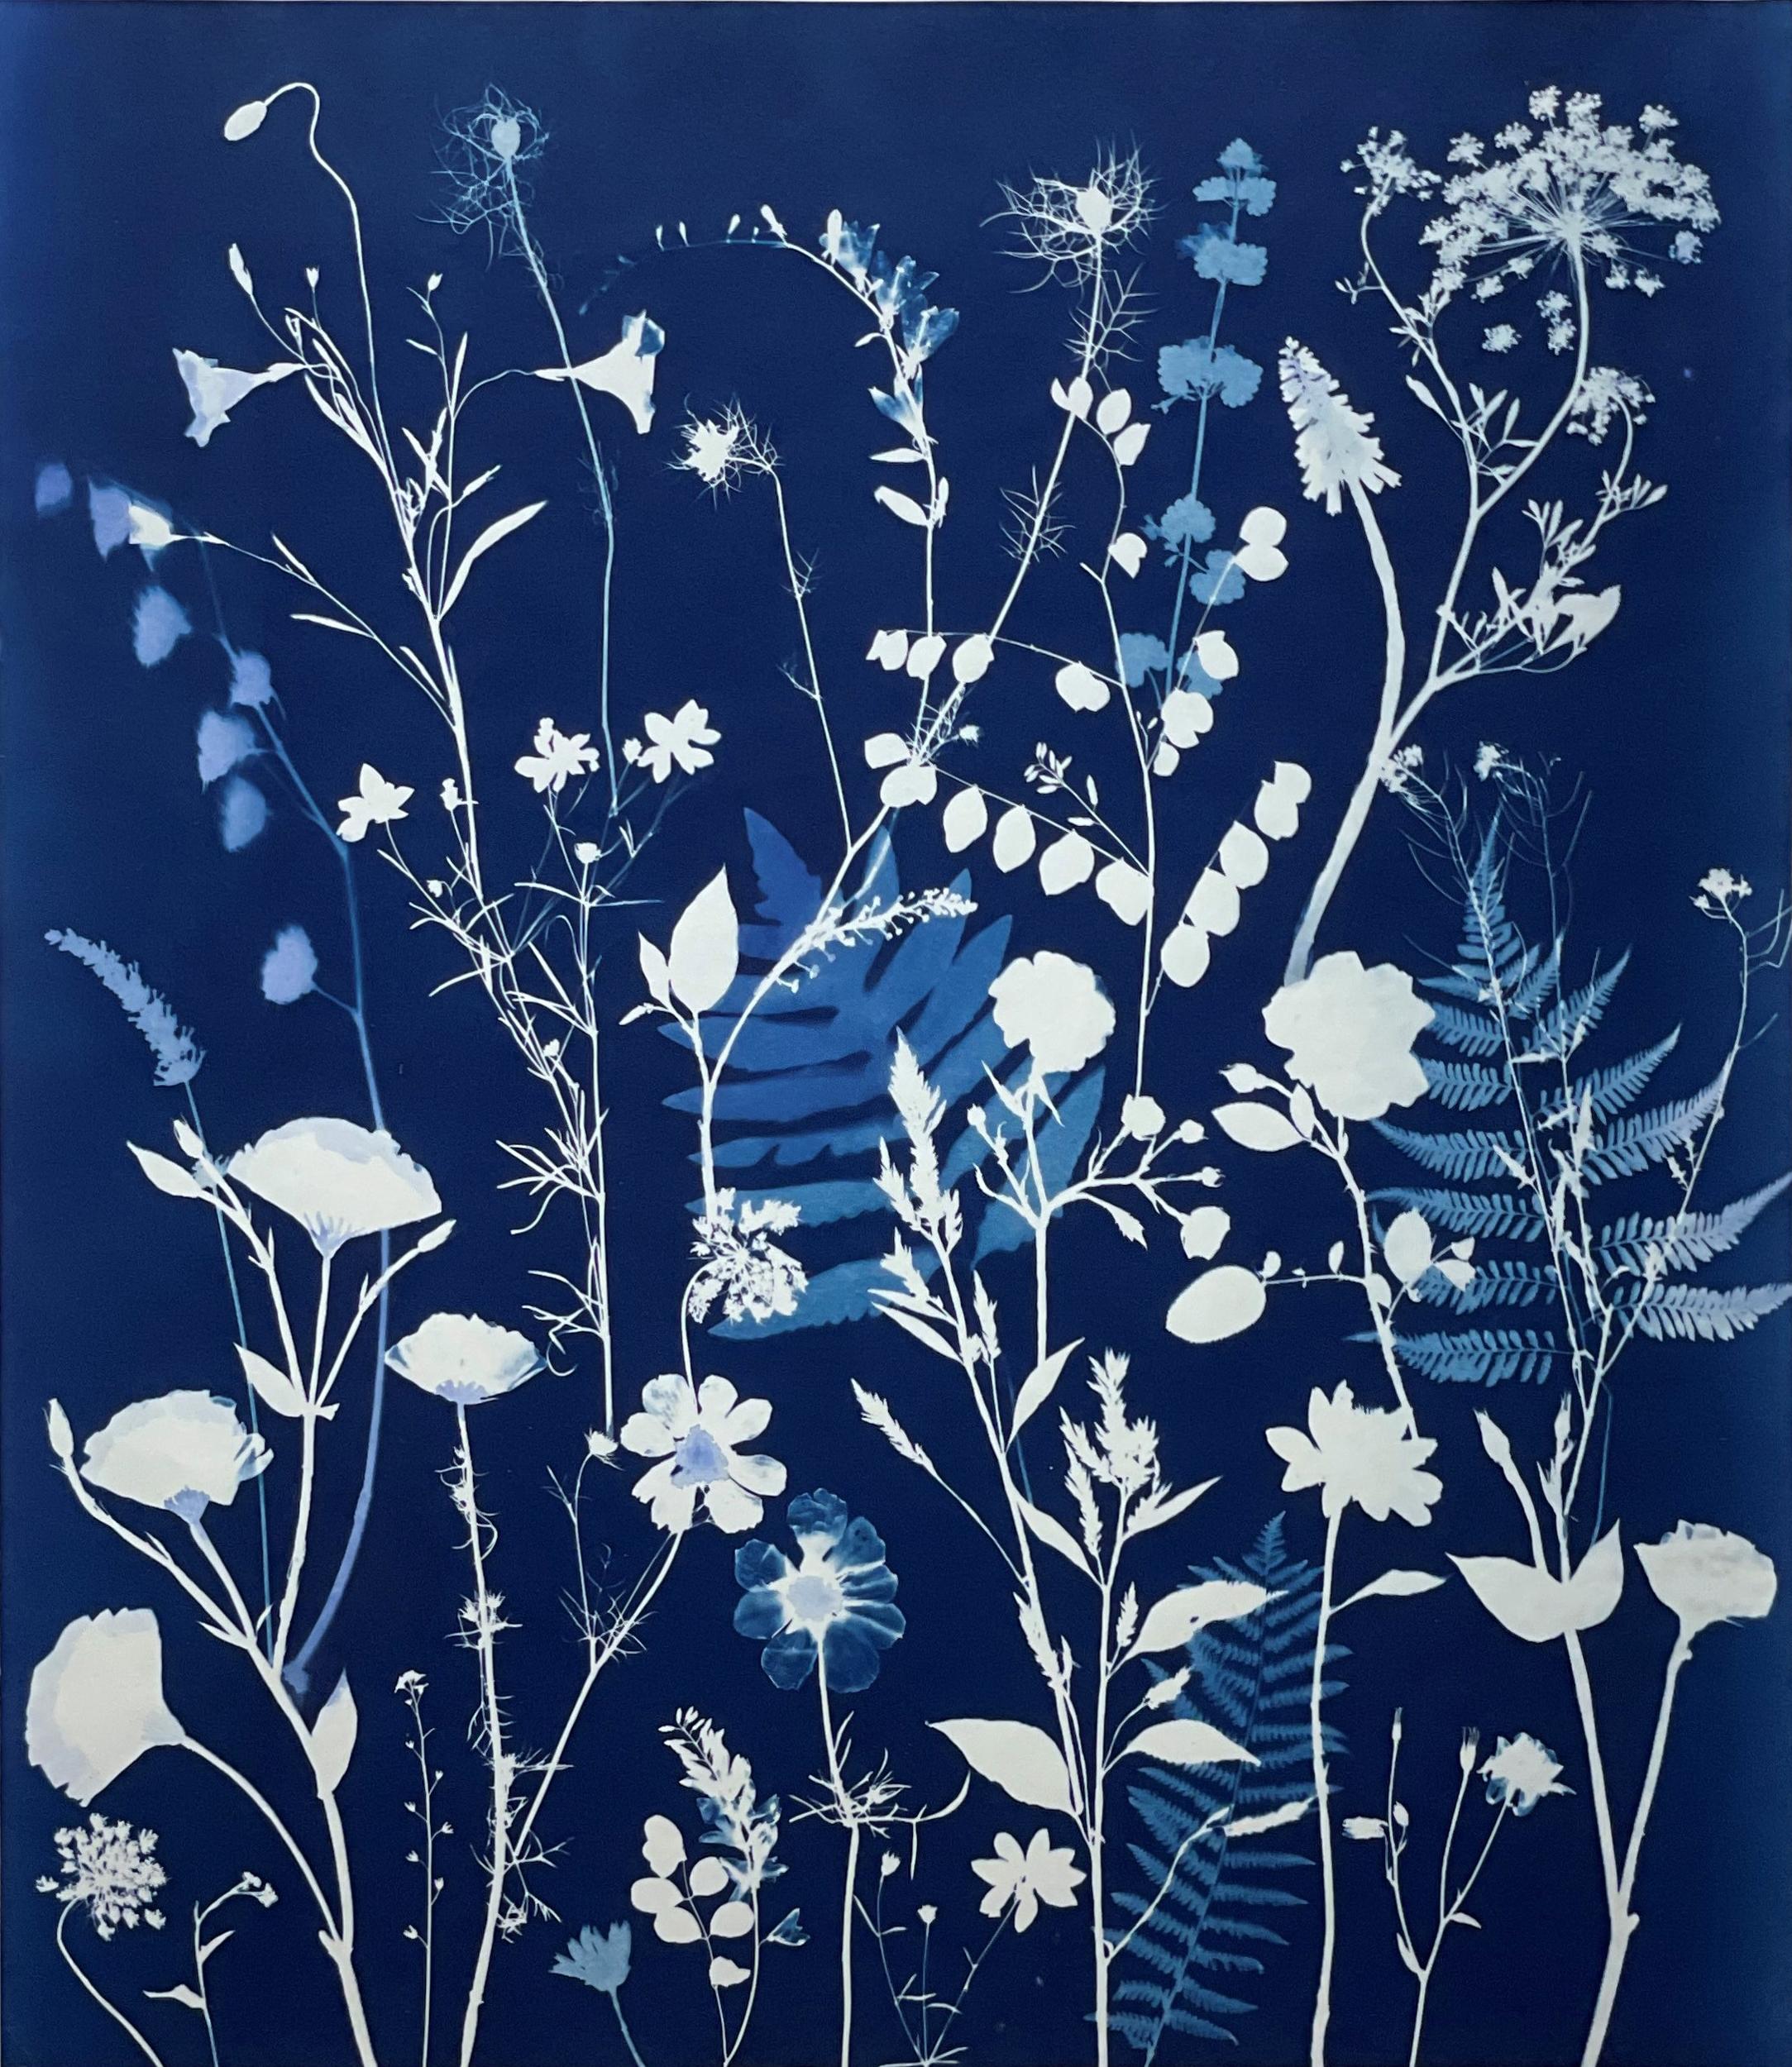 Anne's　Lace　Whitney　Barnes)　at　by　Sale　(Cyanotype　Julia　Life　Queen　For　Julia　Whitney　Painting　Still　Barnes　1stDibs